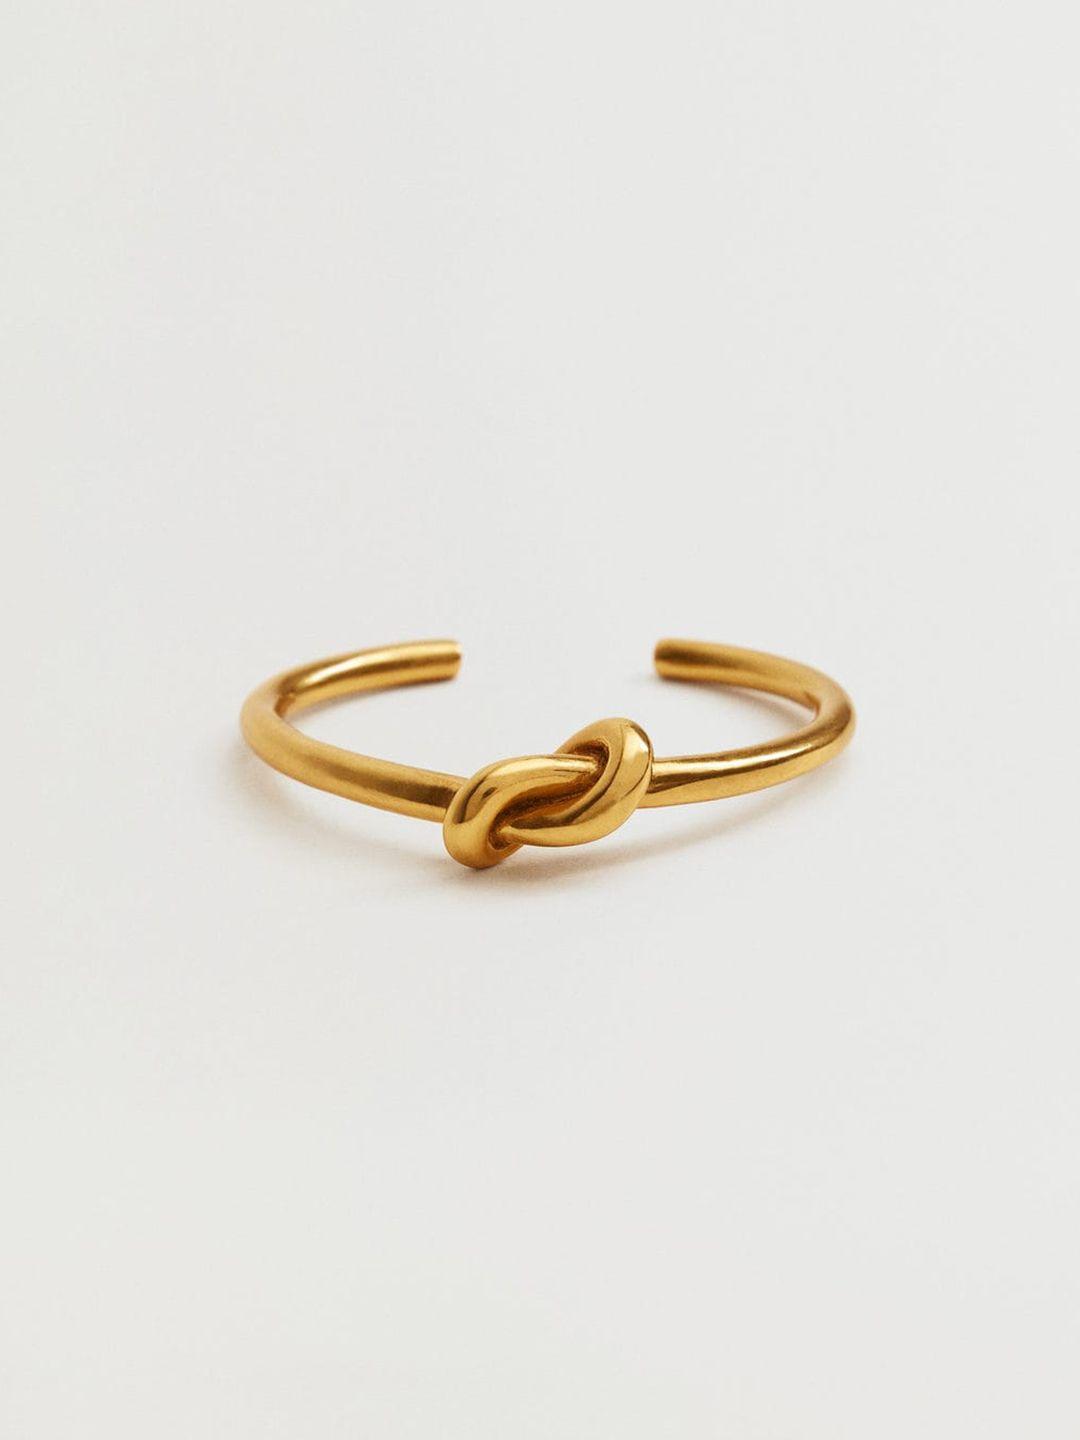 mango women 24k gold-plated cuff bracelet with knot detail